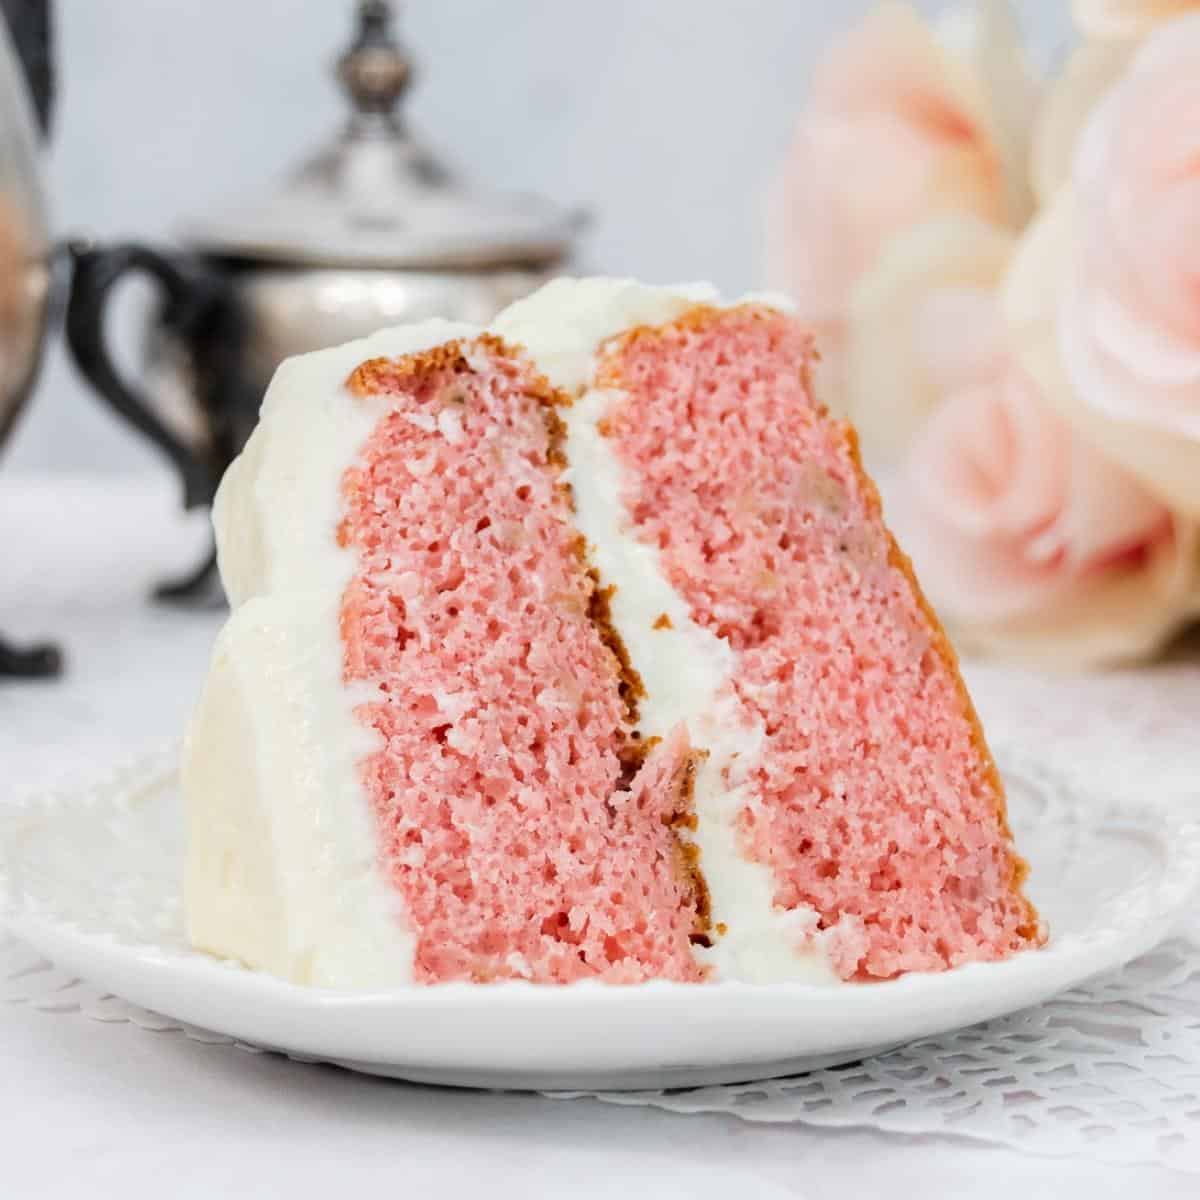 Featured image of strawberry layer cake with bananas and cream cheese.